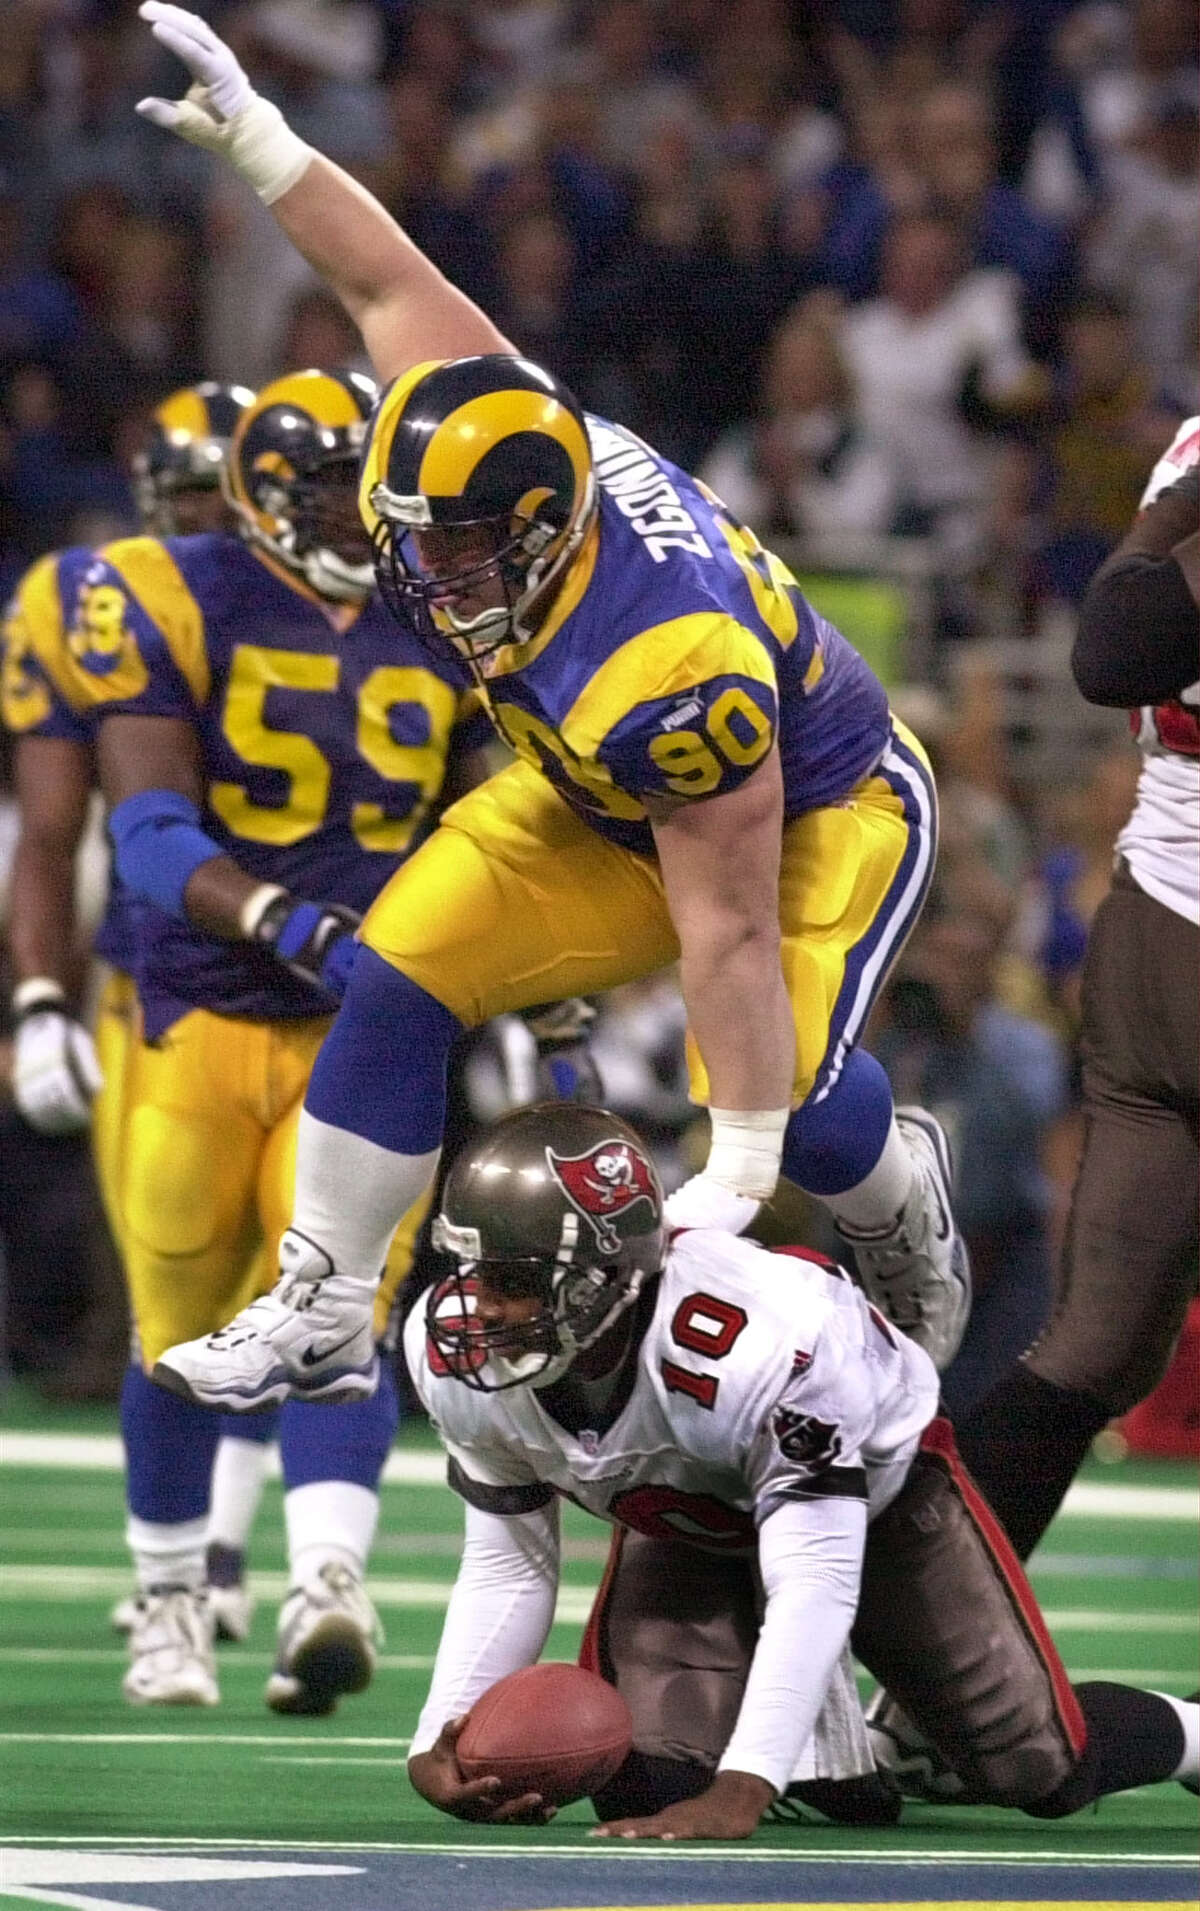 1999 Tampa Bay Buccaneers vs St. Louis Rams Round: NFC championship  Spread: 14.0 Final score: St. Louis 11, Tampa Bay 6 This spread was all about the Tampa Bay deploying rookie Shaun King at quarterback due to an injury to Trent Dilfer. King had completed fewer than half his passes in a divisional round win over Washington. St. Louis, meanwhile, boasted the surprising Kurt Warner and his regular season stats of 4,300 passing yards and 41 touchdowns. Led by defensive stars like Warren Sapp, Derrick Brooks, Ronde Barber and John Lynch, Tampa Bay shut down the Rams’ offense. The only touchdown St. Louis scored came with 4 minutes, 44 seconds left in the game. Until that time, Tampa Bay led, 6-5. 